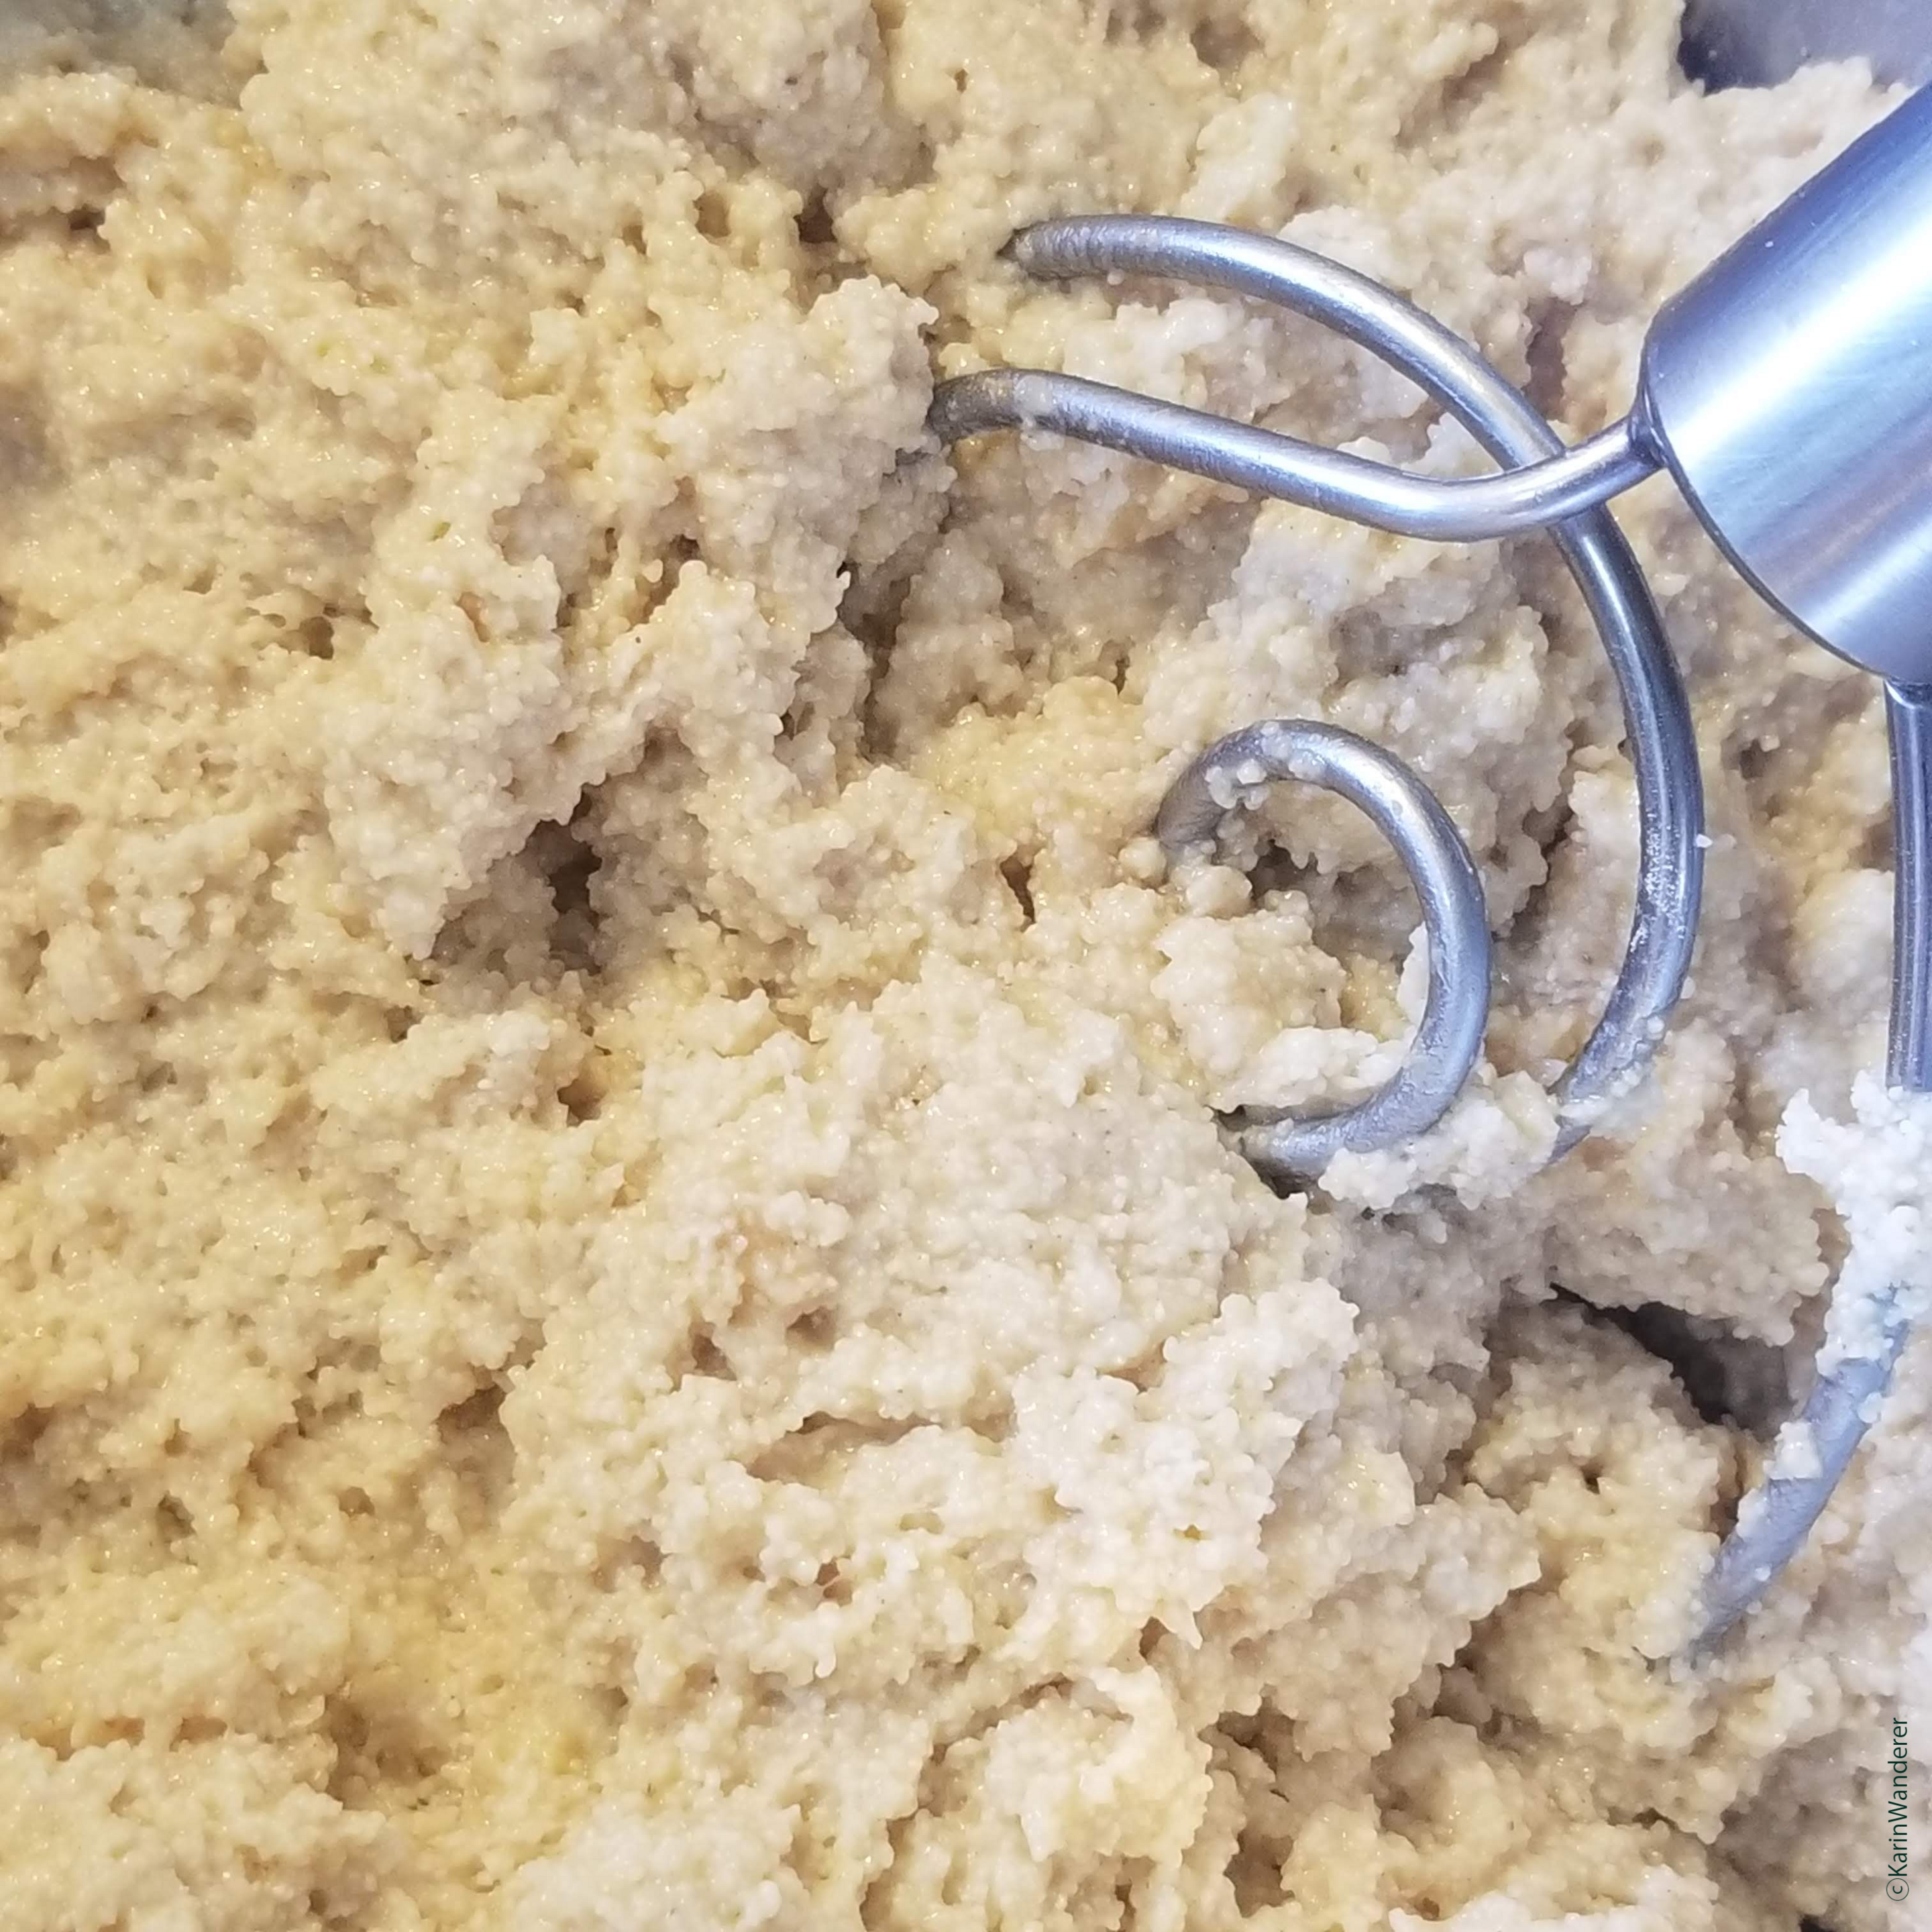 Photo of just-mixed bread dough; it almost looks like very wet sand.